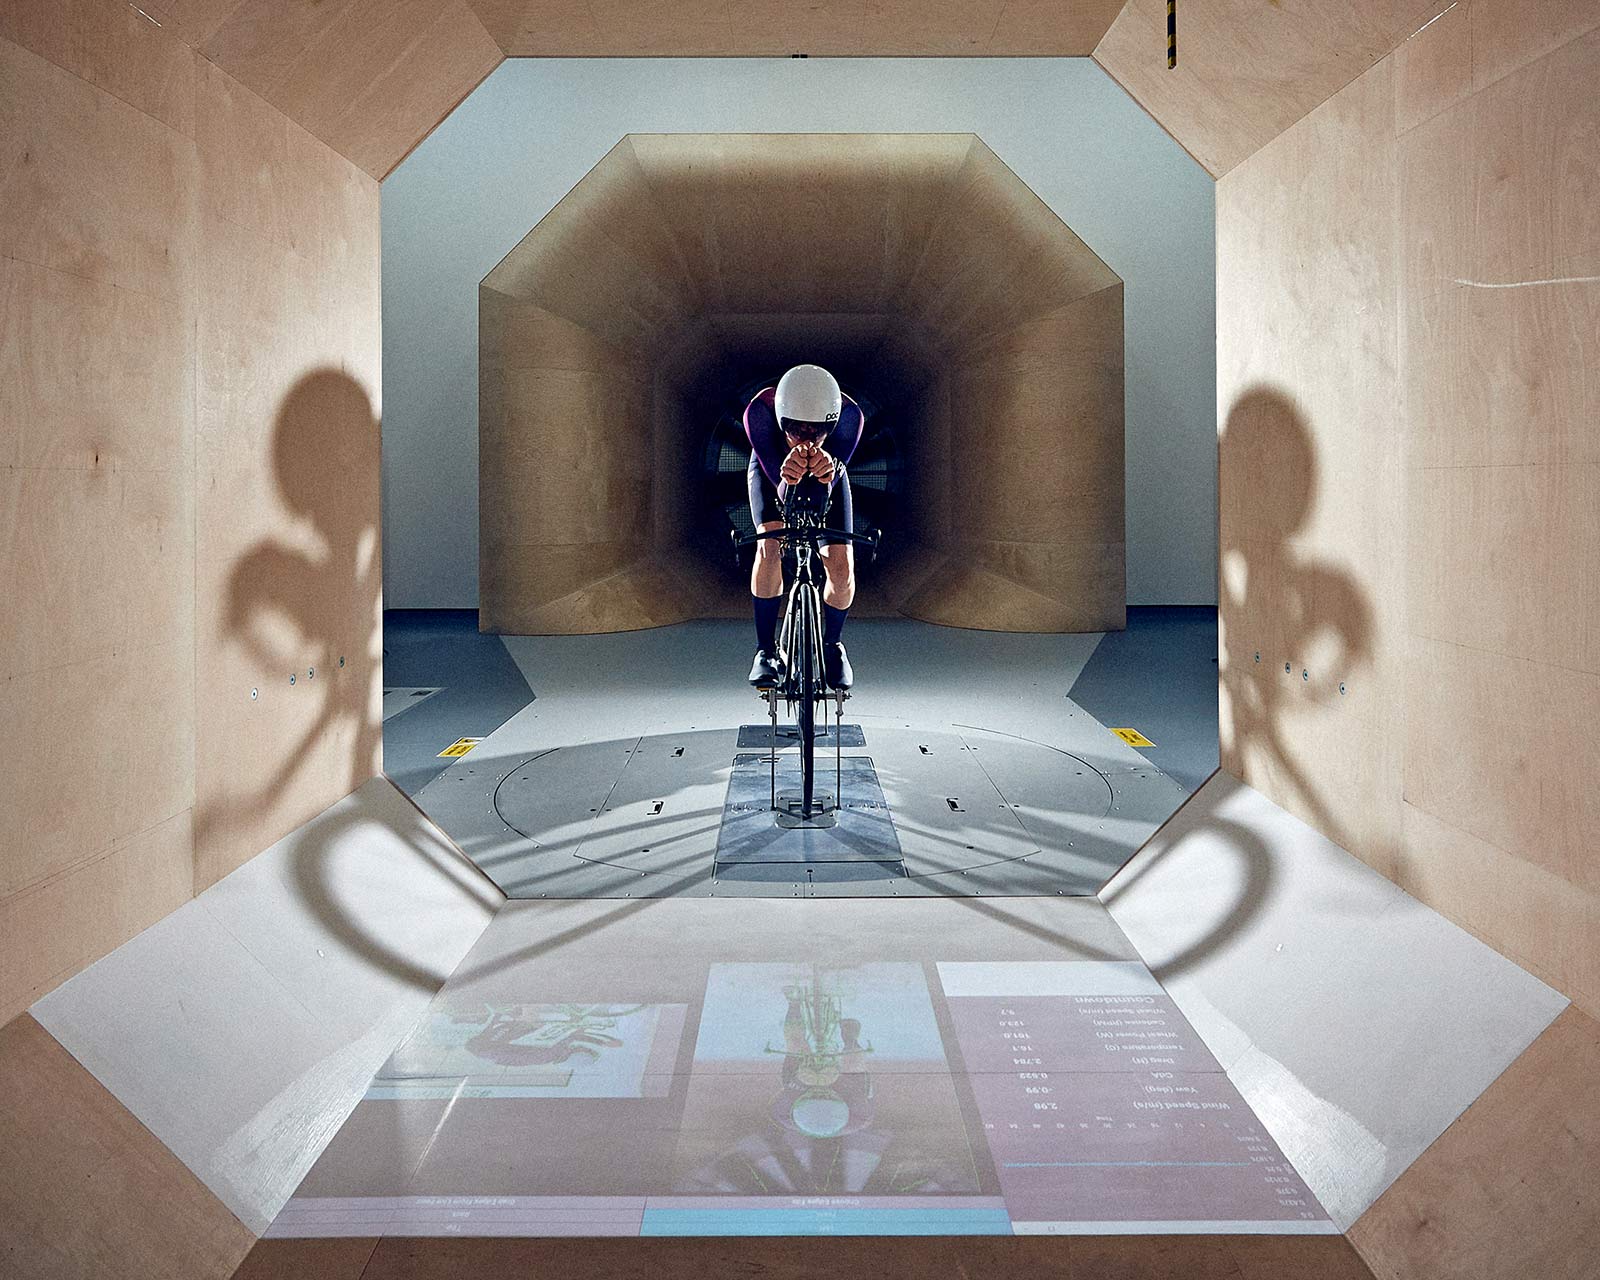 2021 Rapha TT Aerosuit, fastest-ever time trial skinsuit debuts at Giro d Italia, wind tunnel tested 